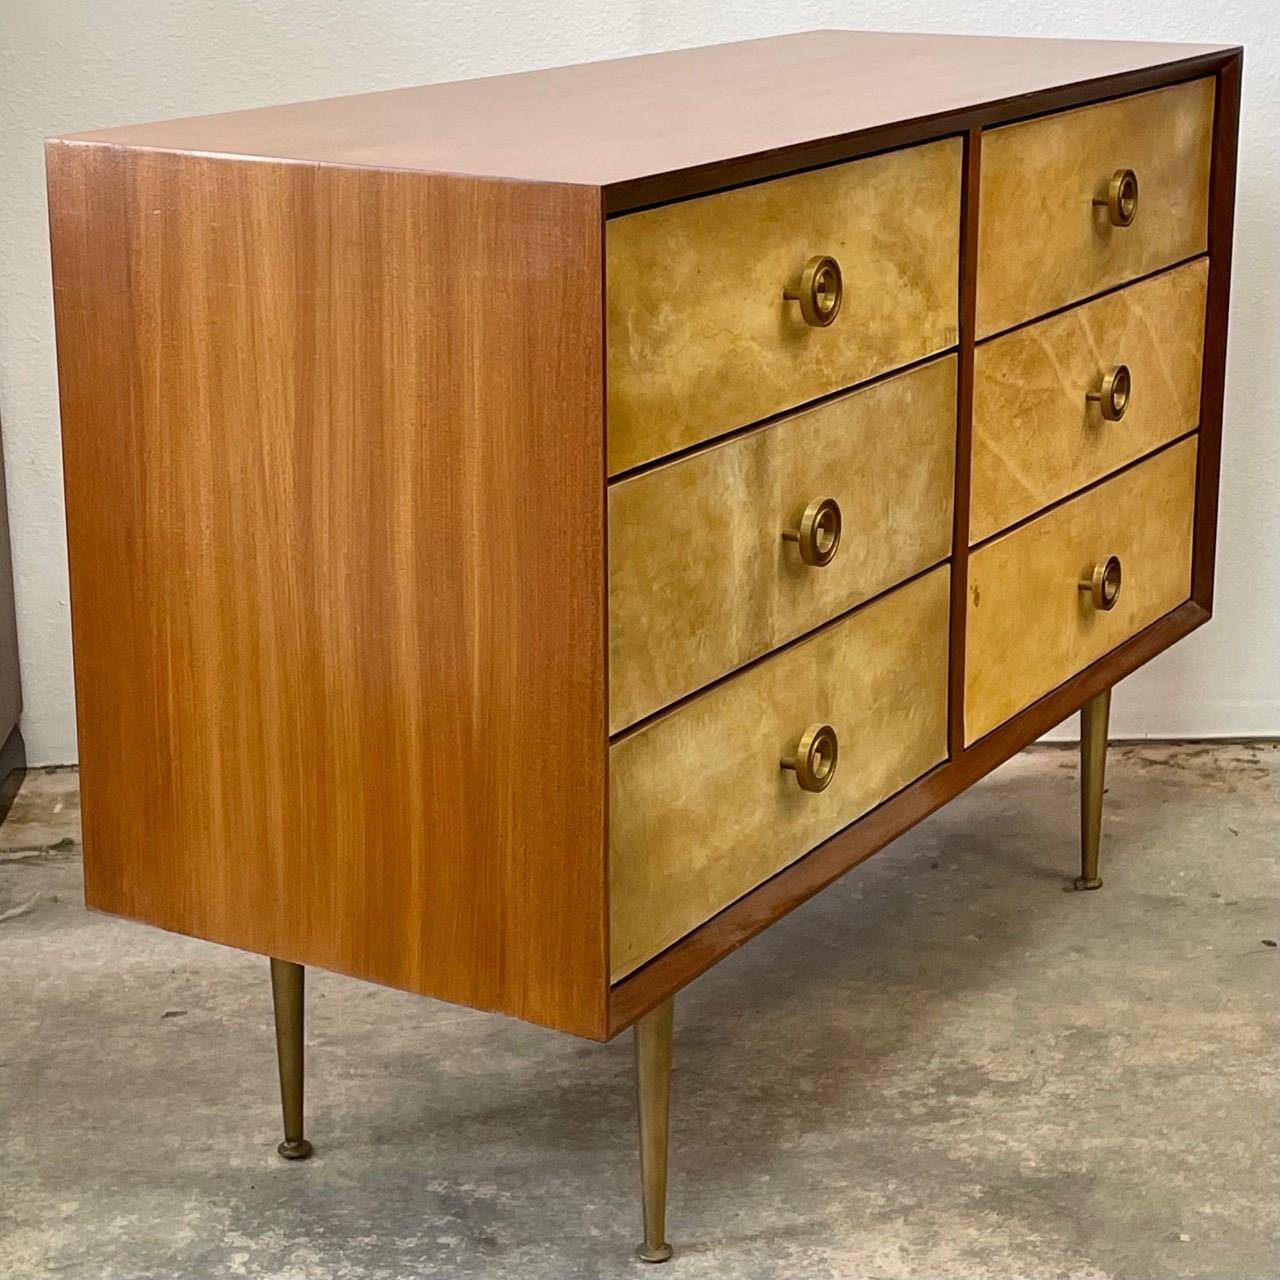 A six drawer chest with parchment drawer fronts, brass legs and handles, in a ribbon mahogany case. Elegant and light, this chest would be a lovely accent to any room.